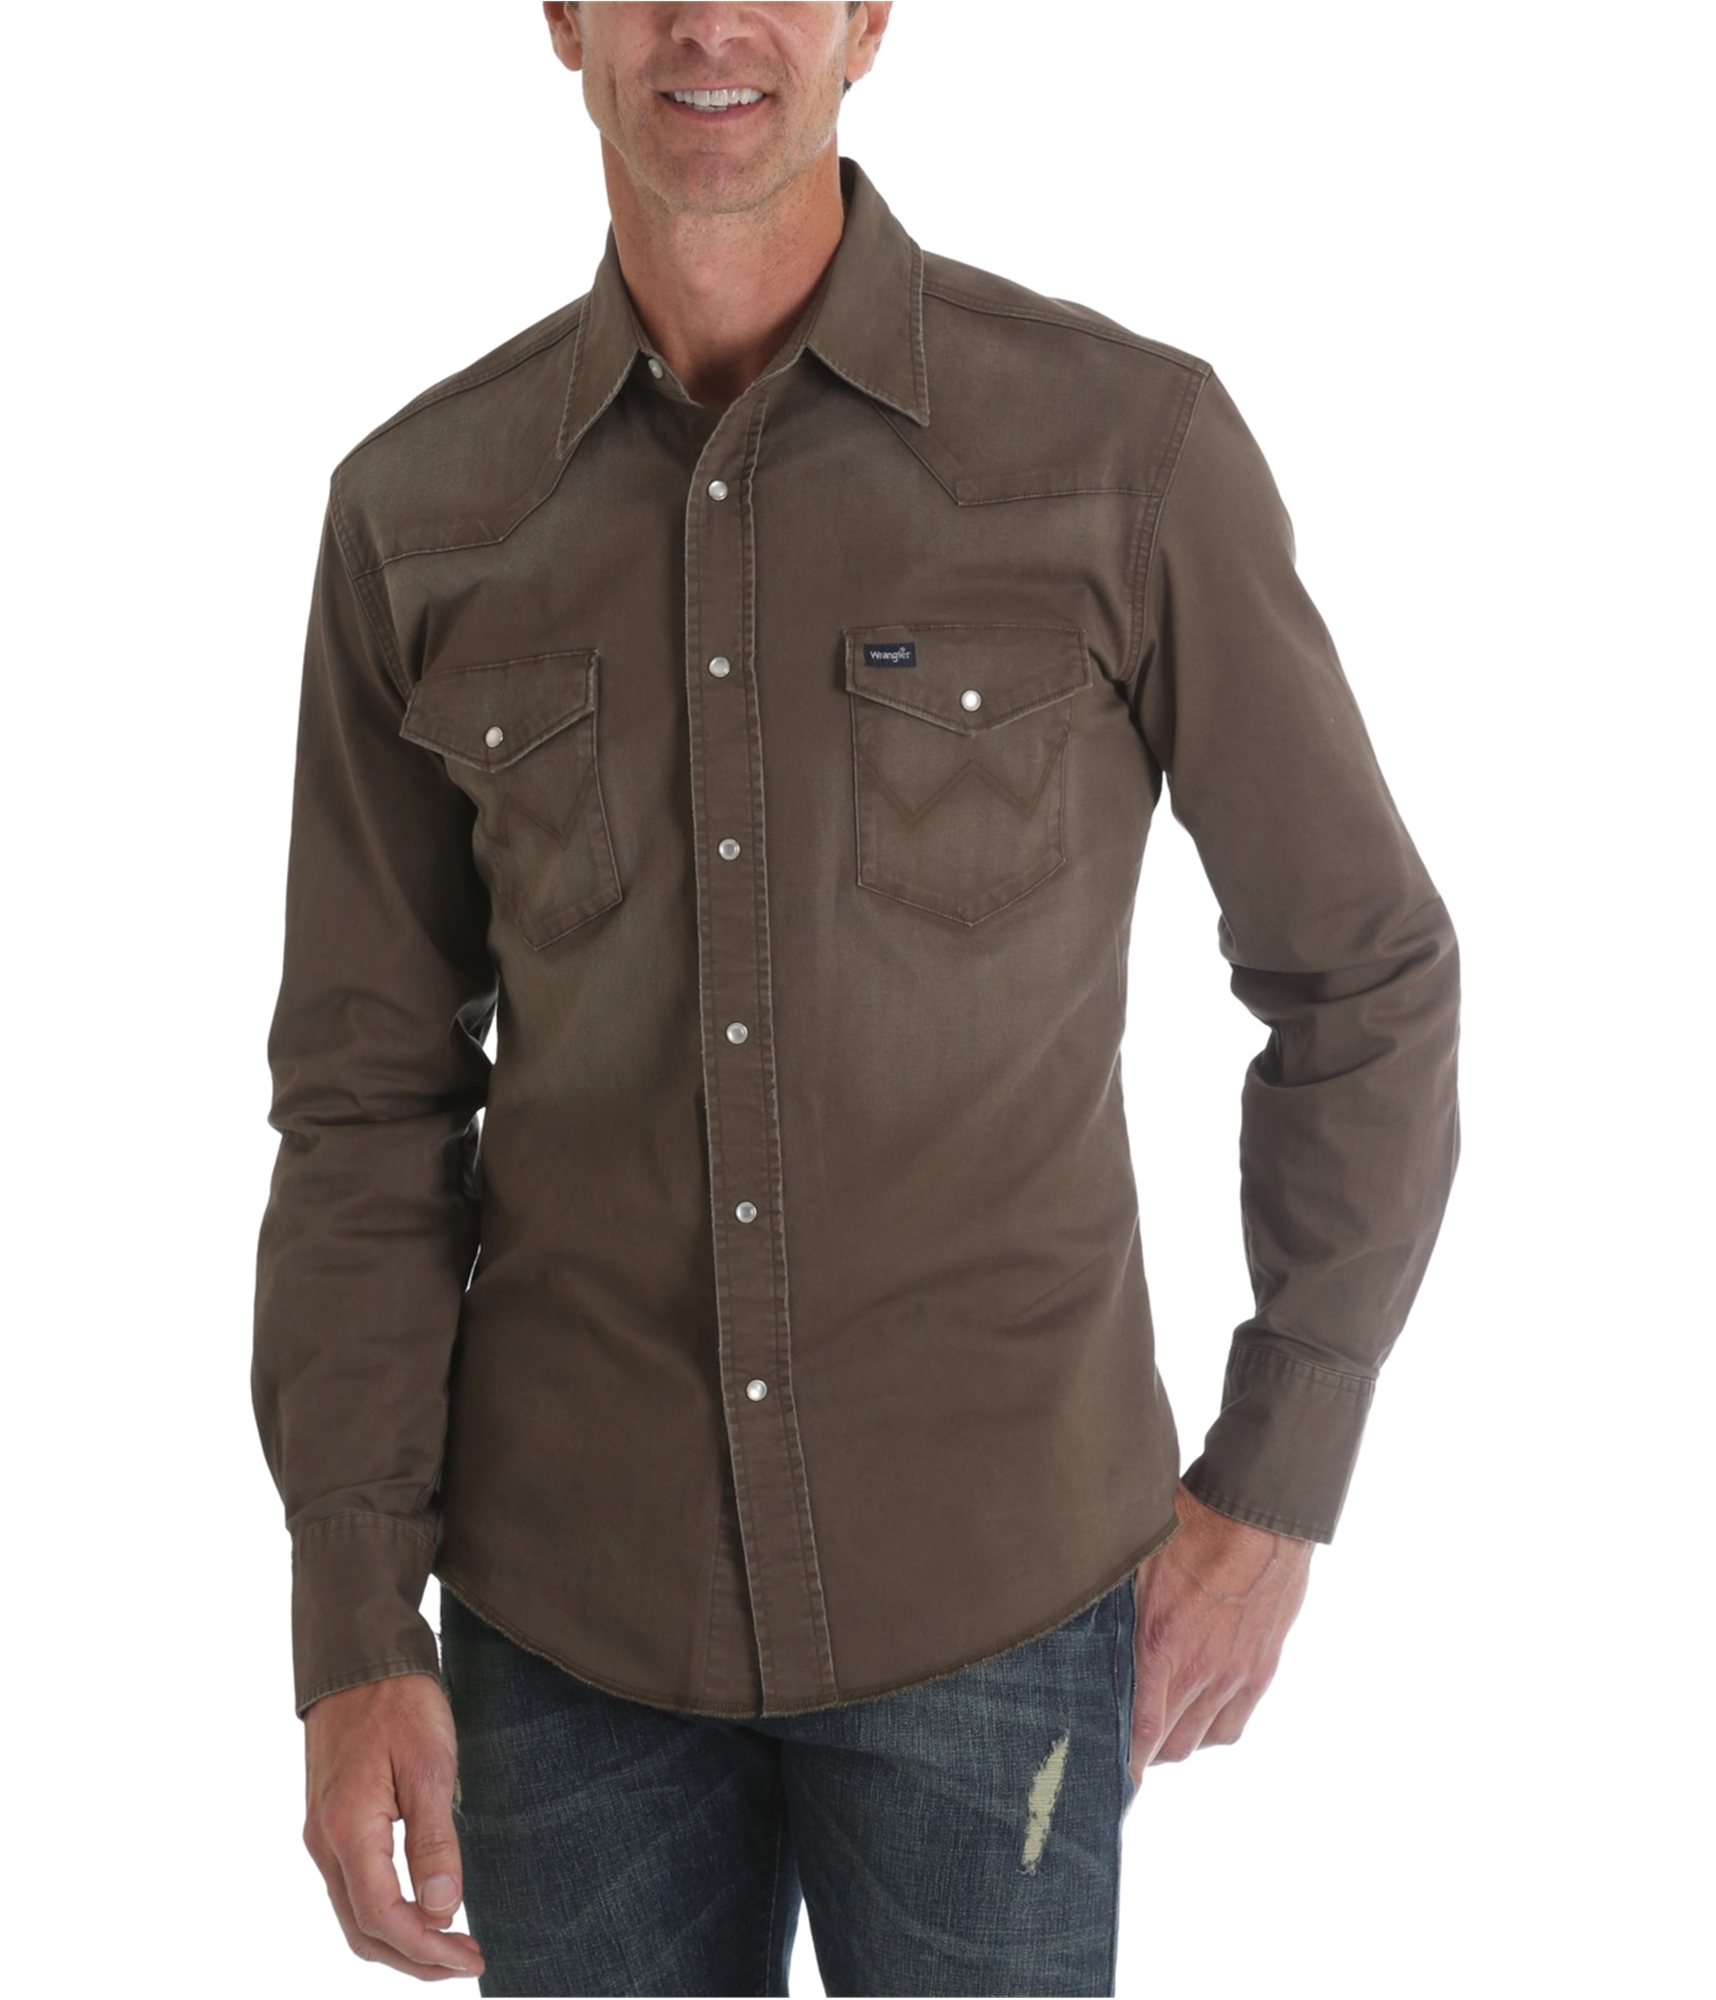 Buy a Mens Wrangler Authentic Button Up Shirt Online 